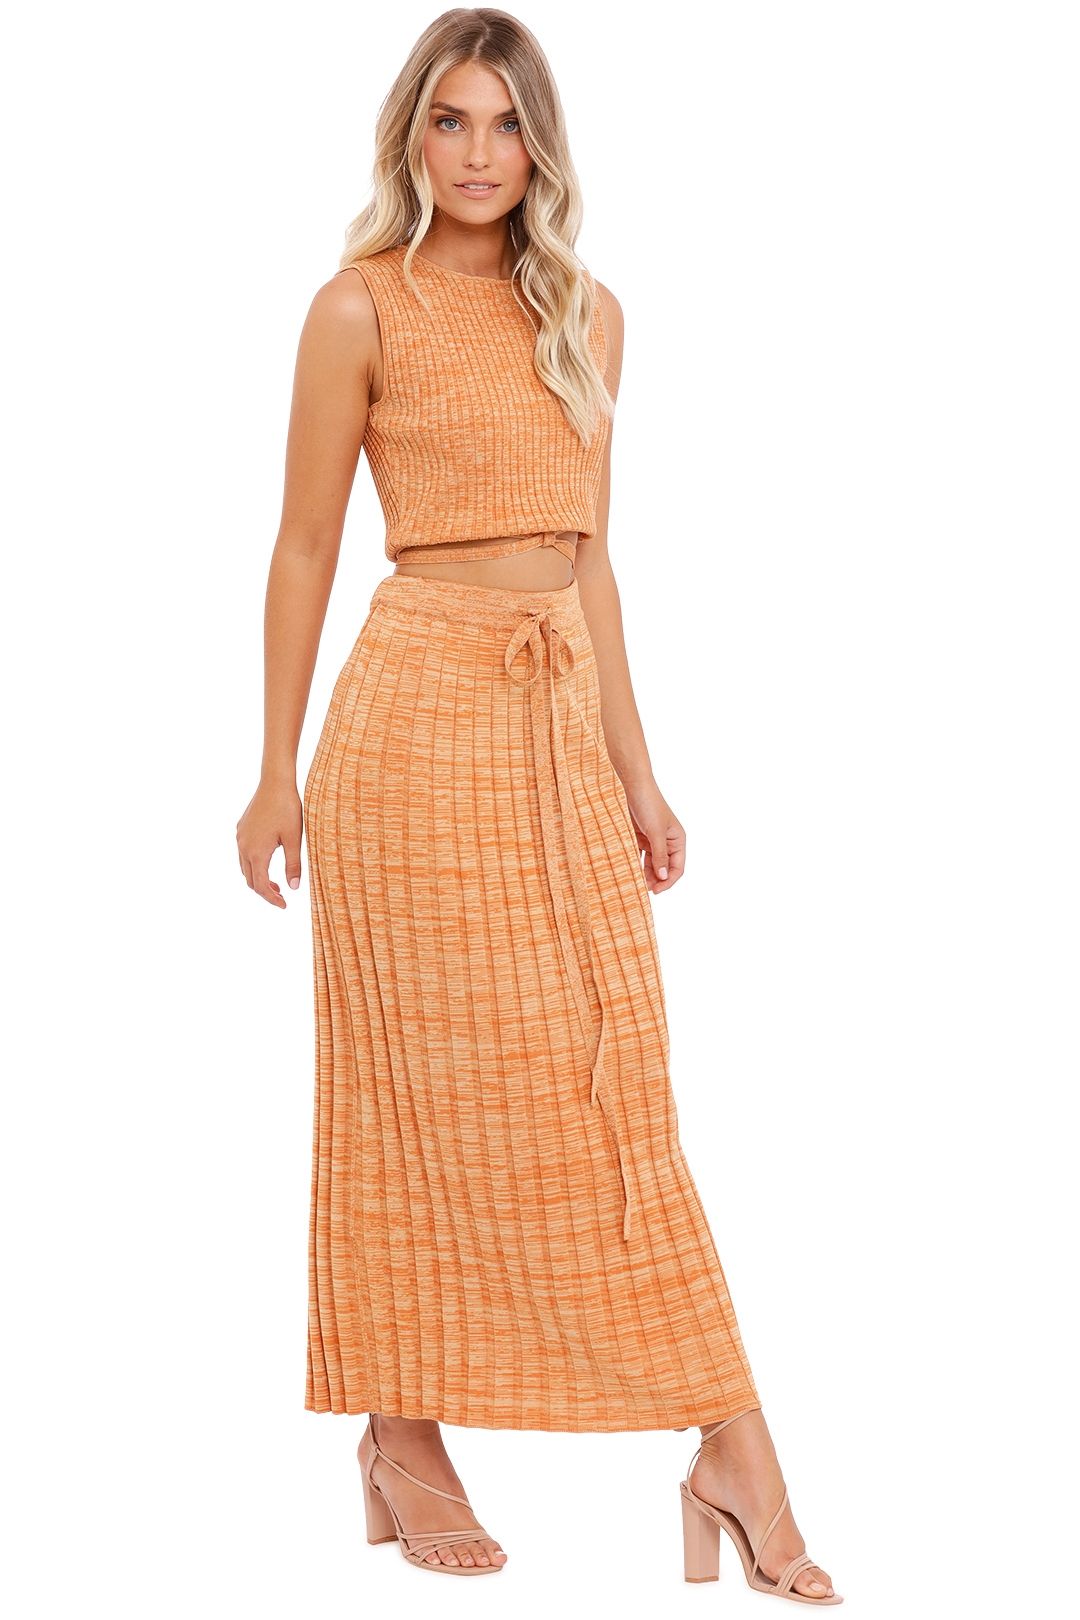 Ministry of Style Retrospective Knit Top and Skirt Faded Citrus bodycon